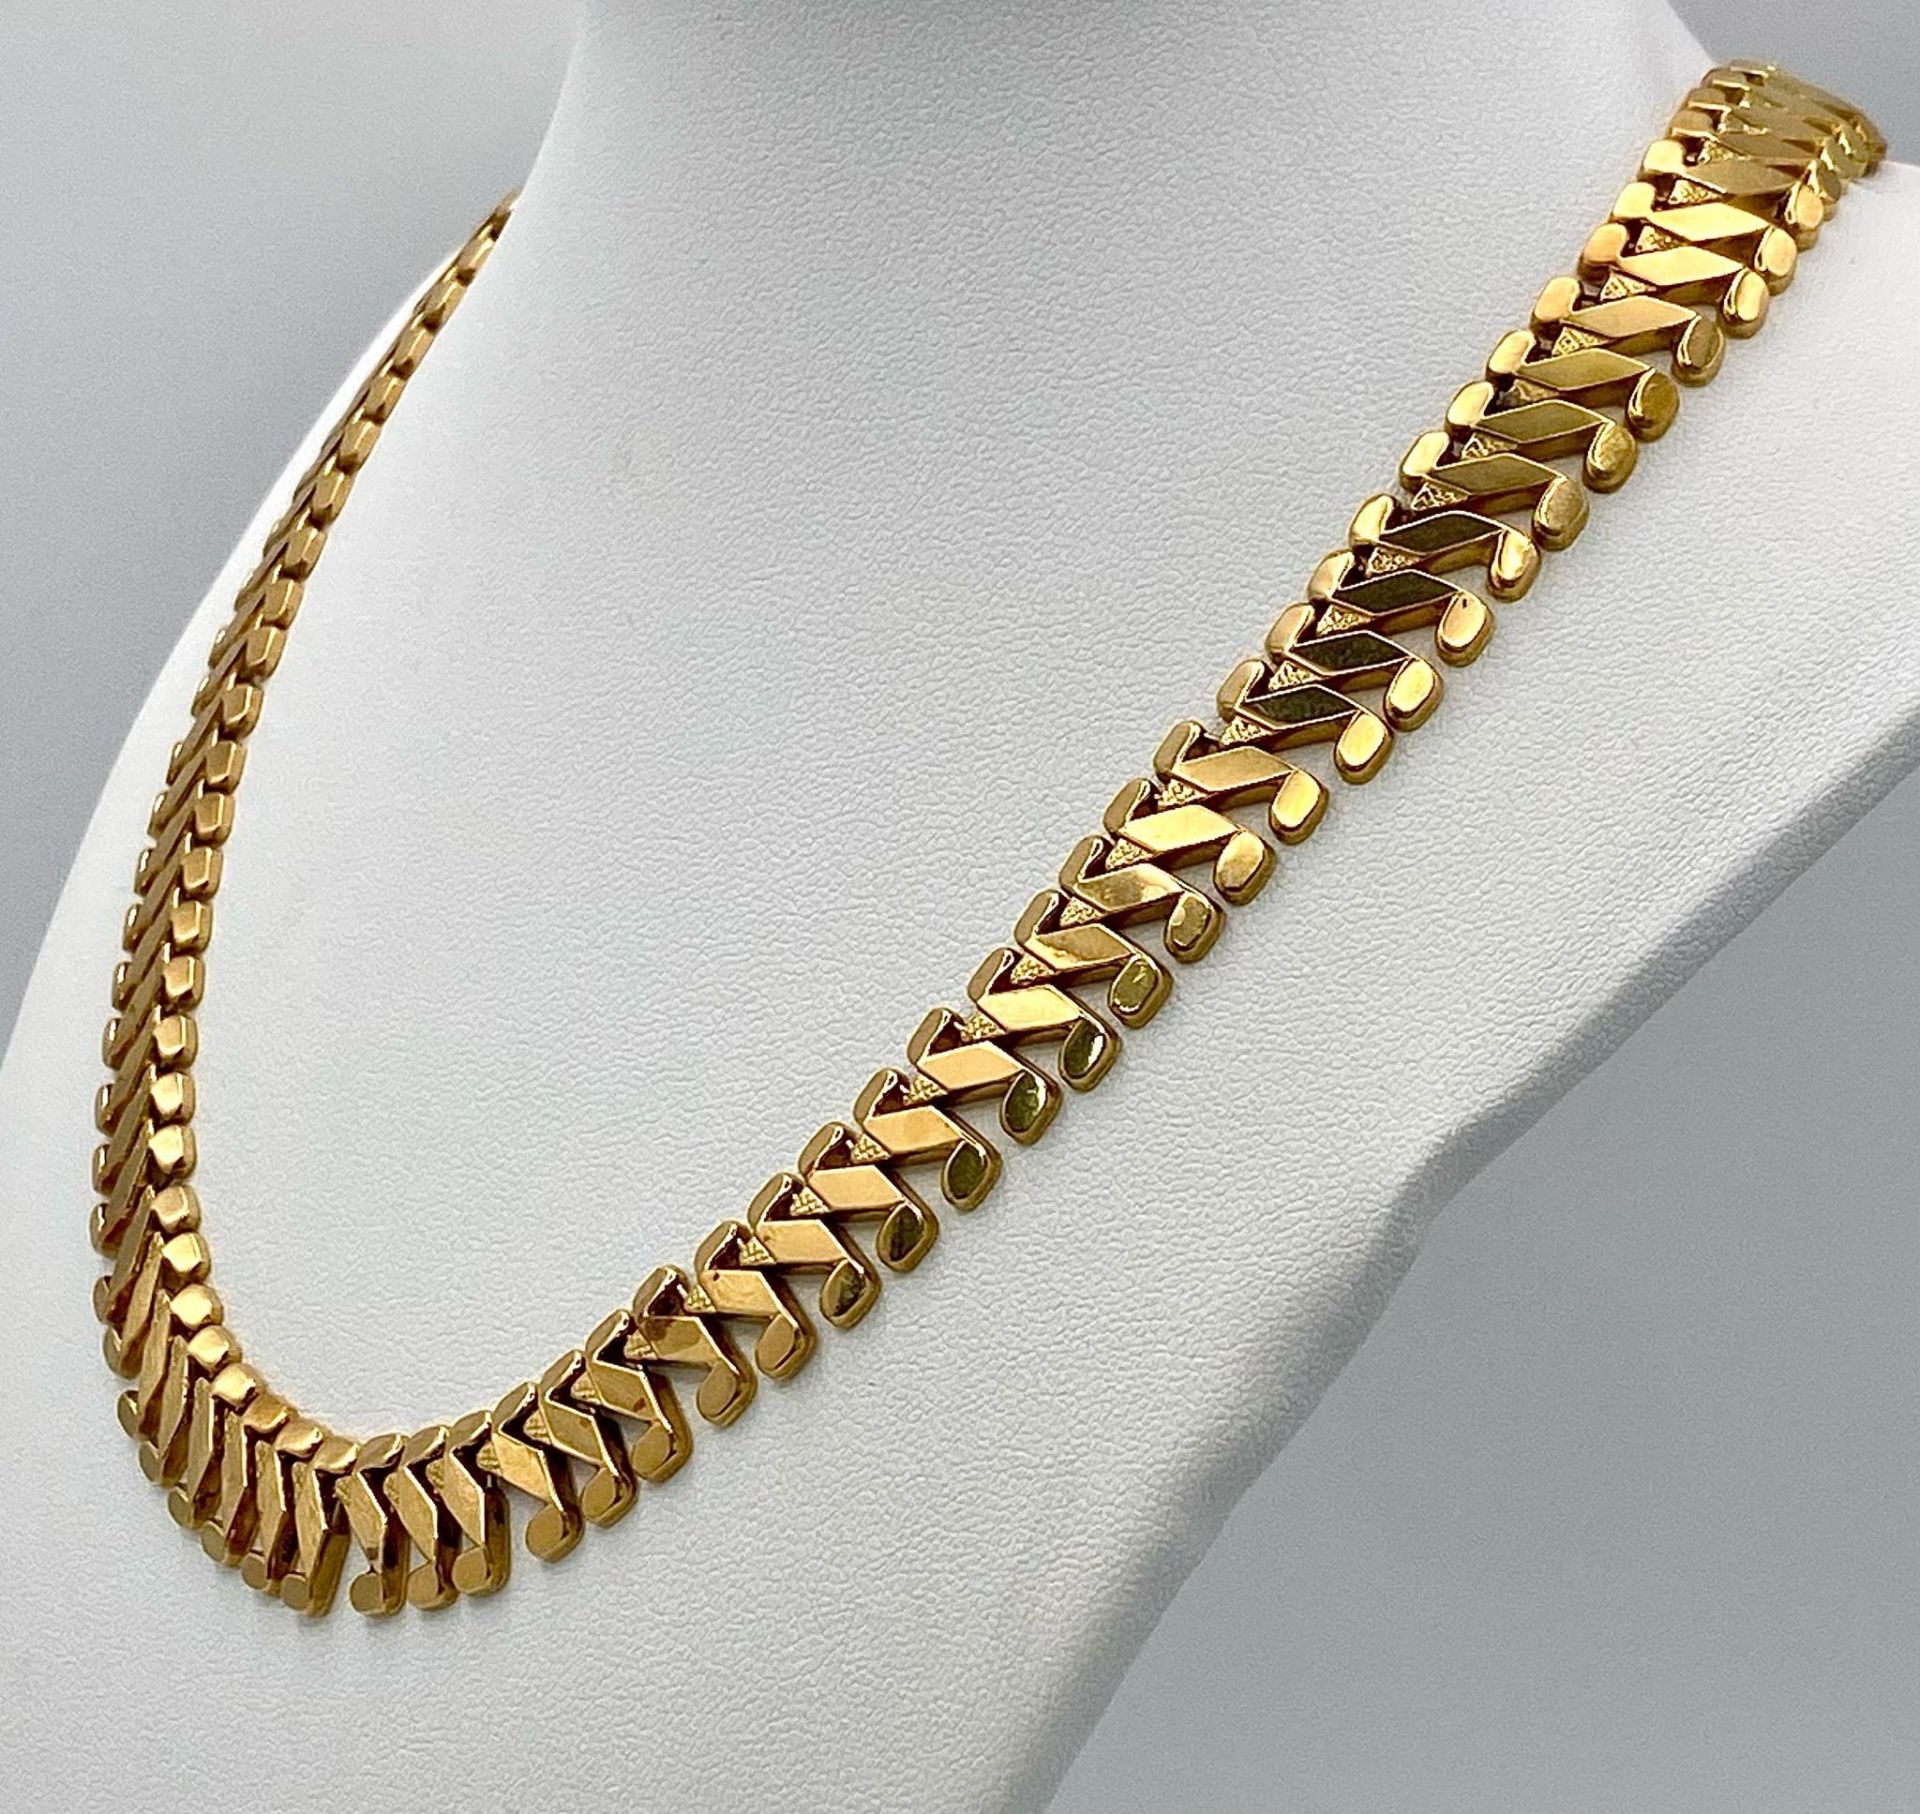 A Wonderful 18K Yellow Gold Reptilian Link Necklace with a Snakes Head Clasp! 42cm length. 37.71g - Image 3 of 8